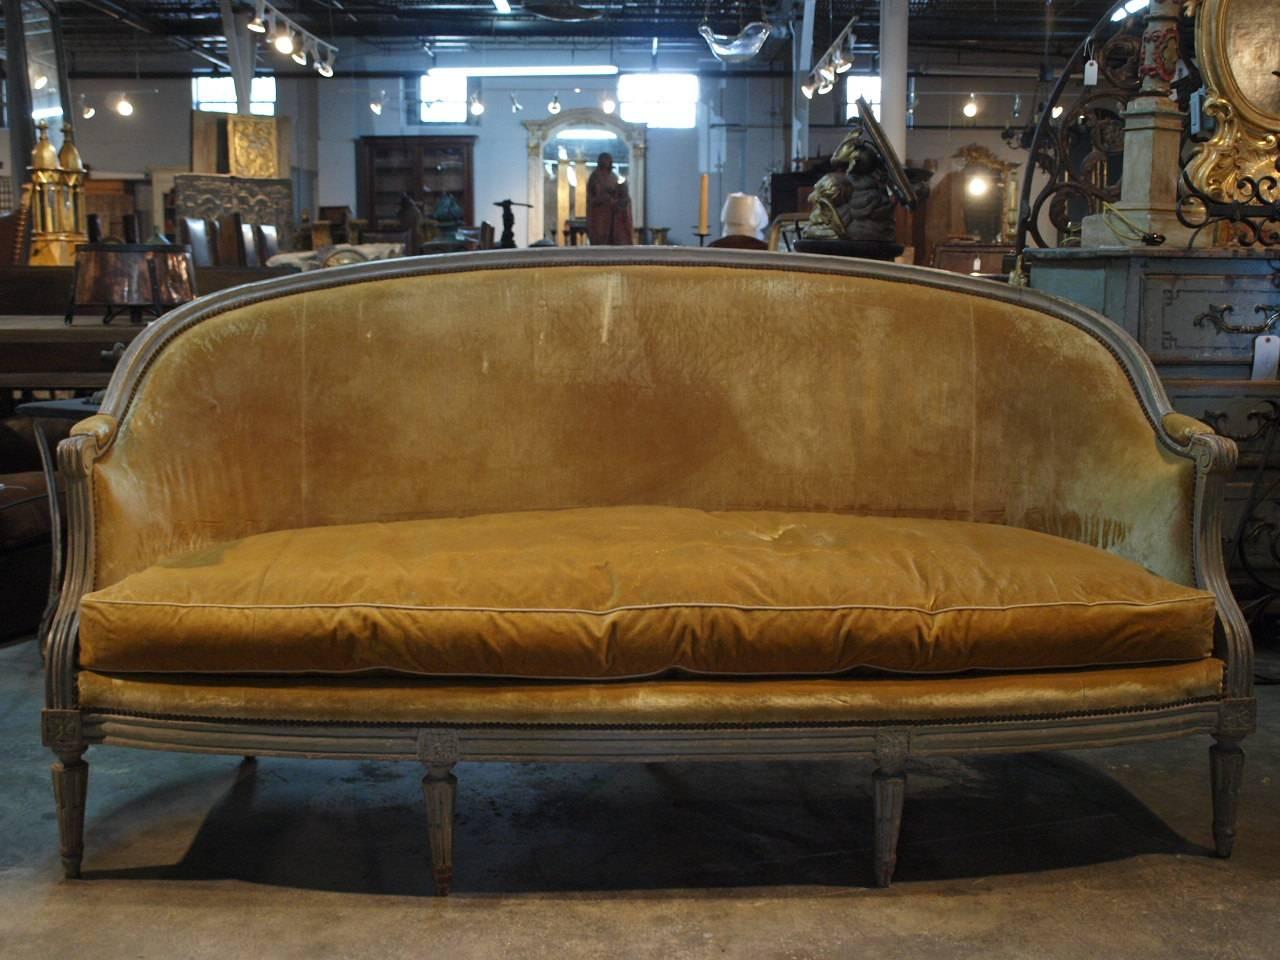 An exceptional pair of 19th century Louis XVI style banquettes, sofas. Beautifully constructed with the original painted finish. The pair is in excellent condition, very sound, very sturdy. Their larger scale makes this pair indeed outstanding.